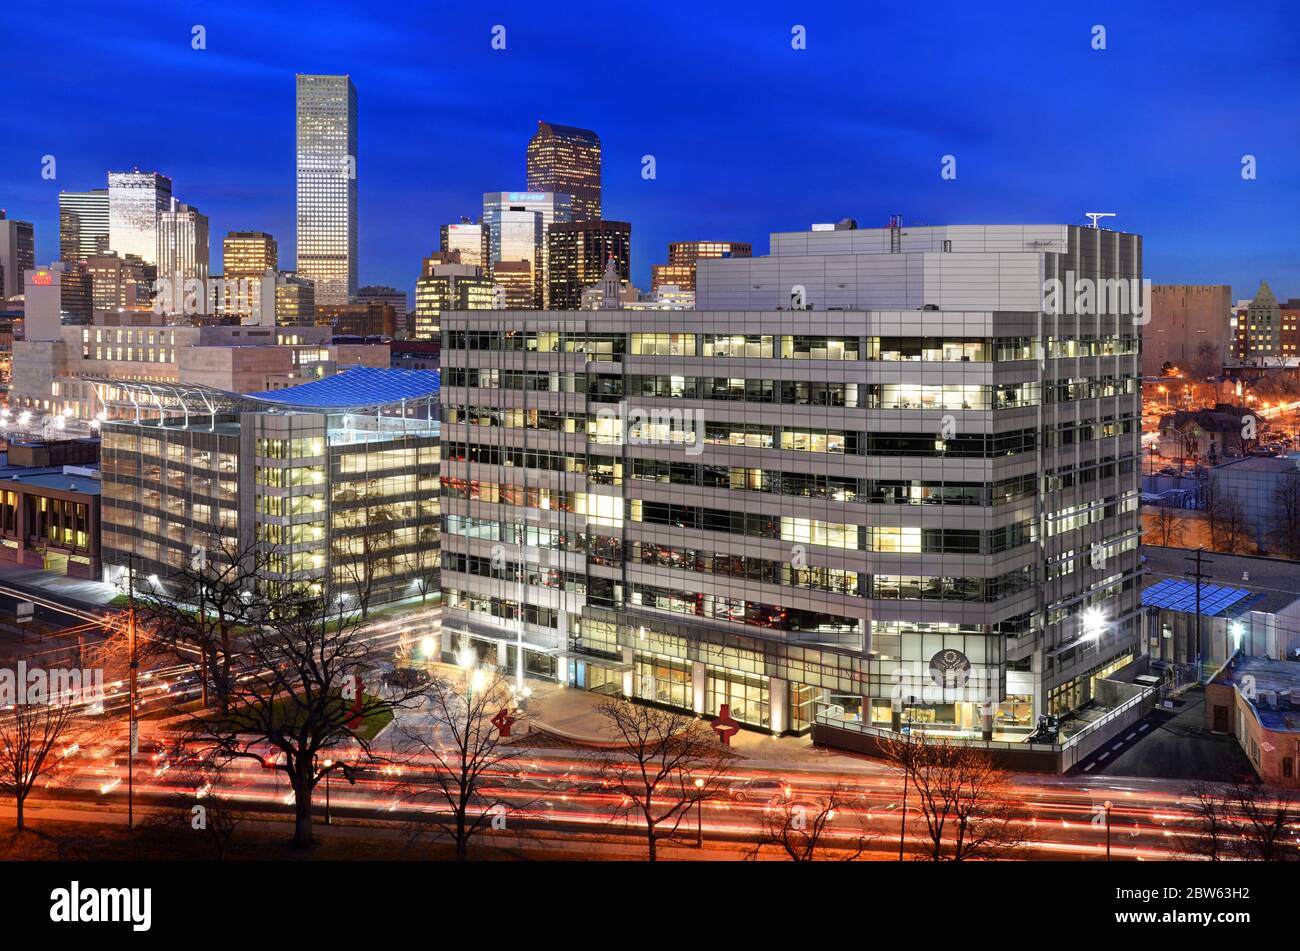 Denver, Colorado Skyline at night from Speer Blvd. featuring the GSA building and parking lot. Stock Photo